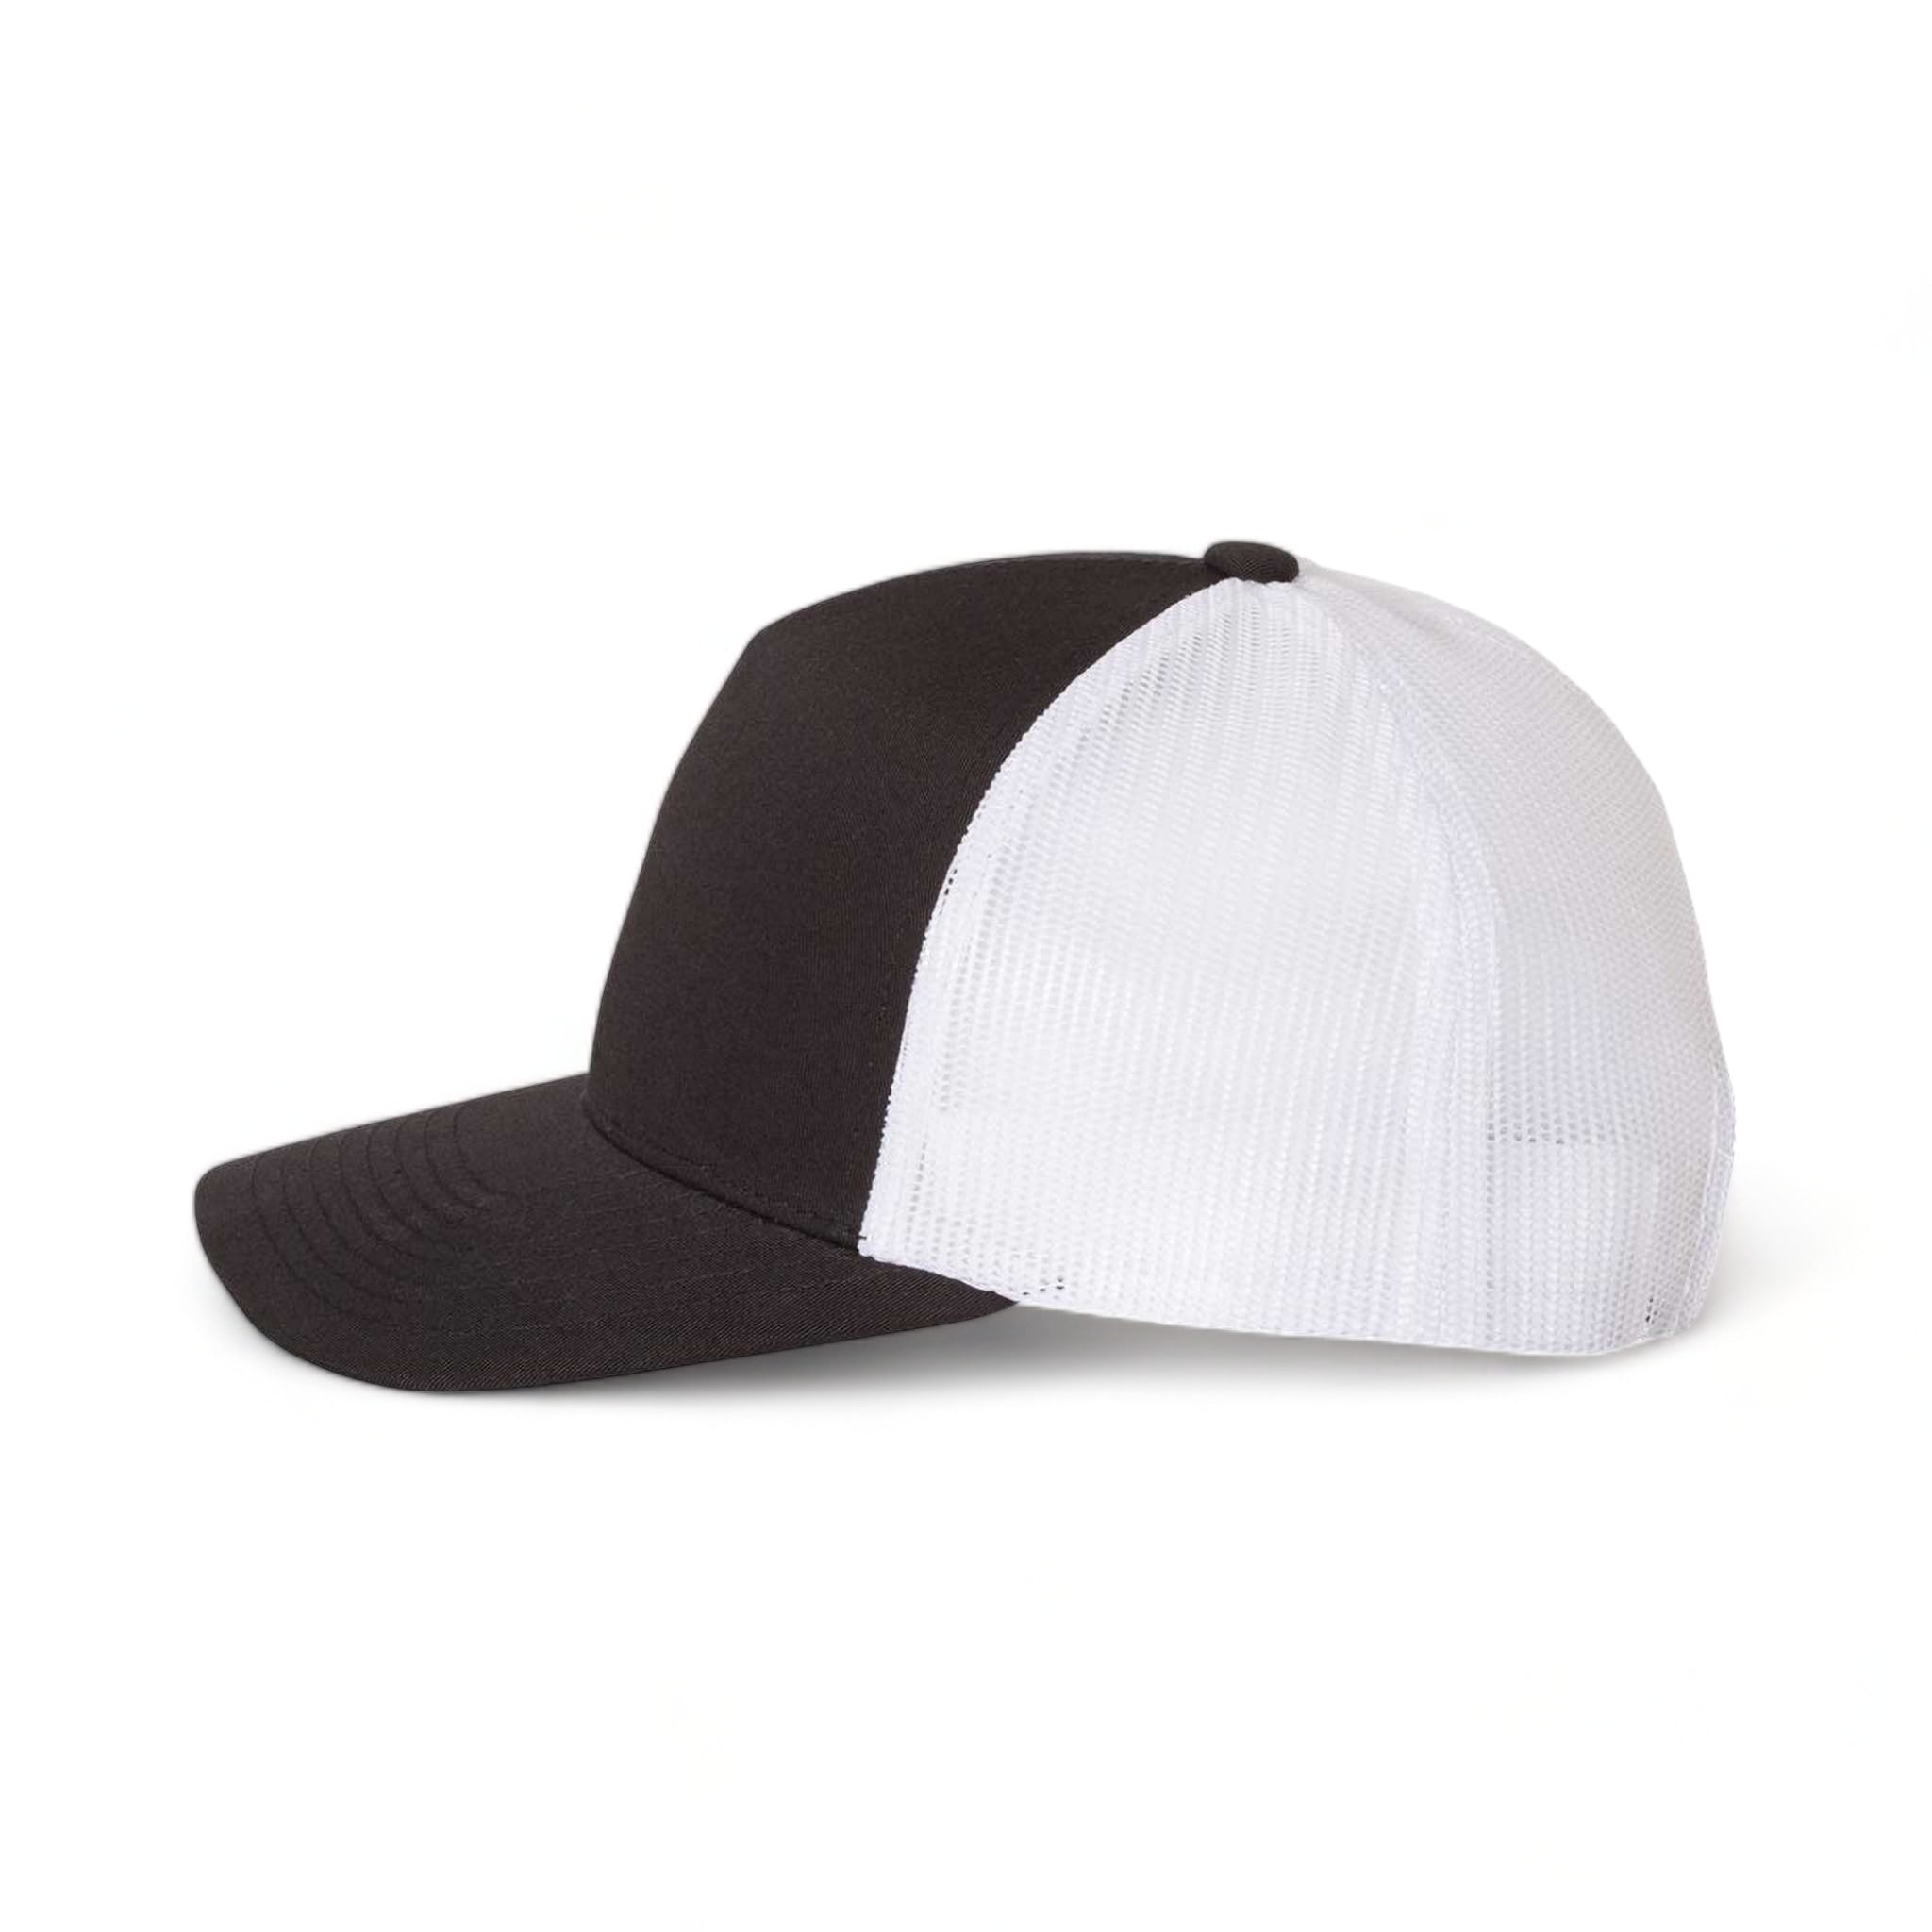 Side view of YP Classics 6506 custom hat in black and white